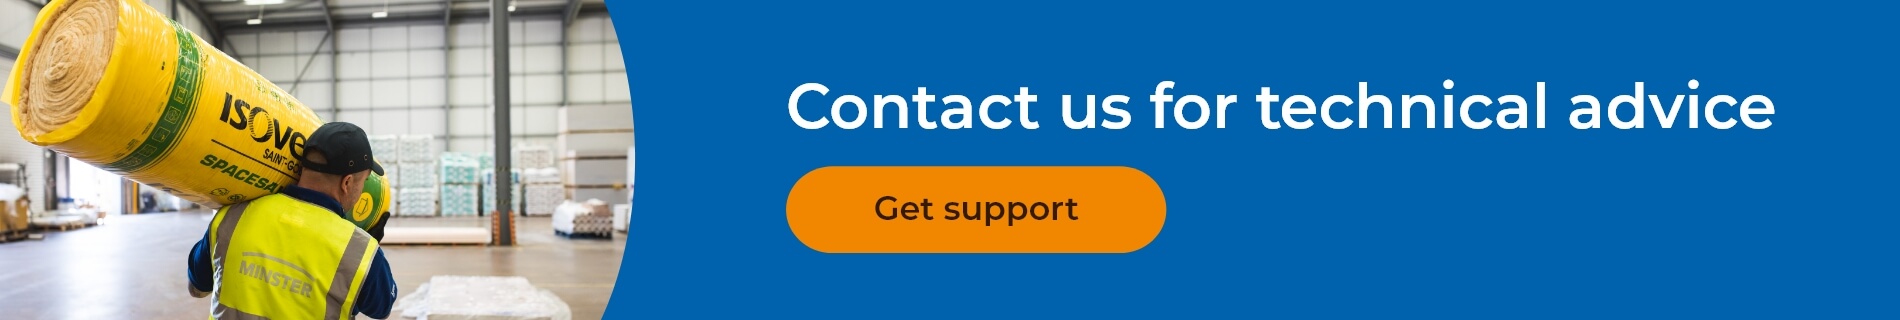 Contact us for technical support